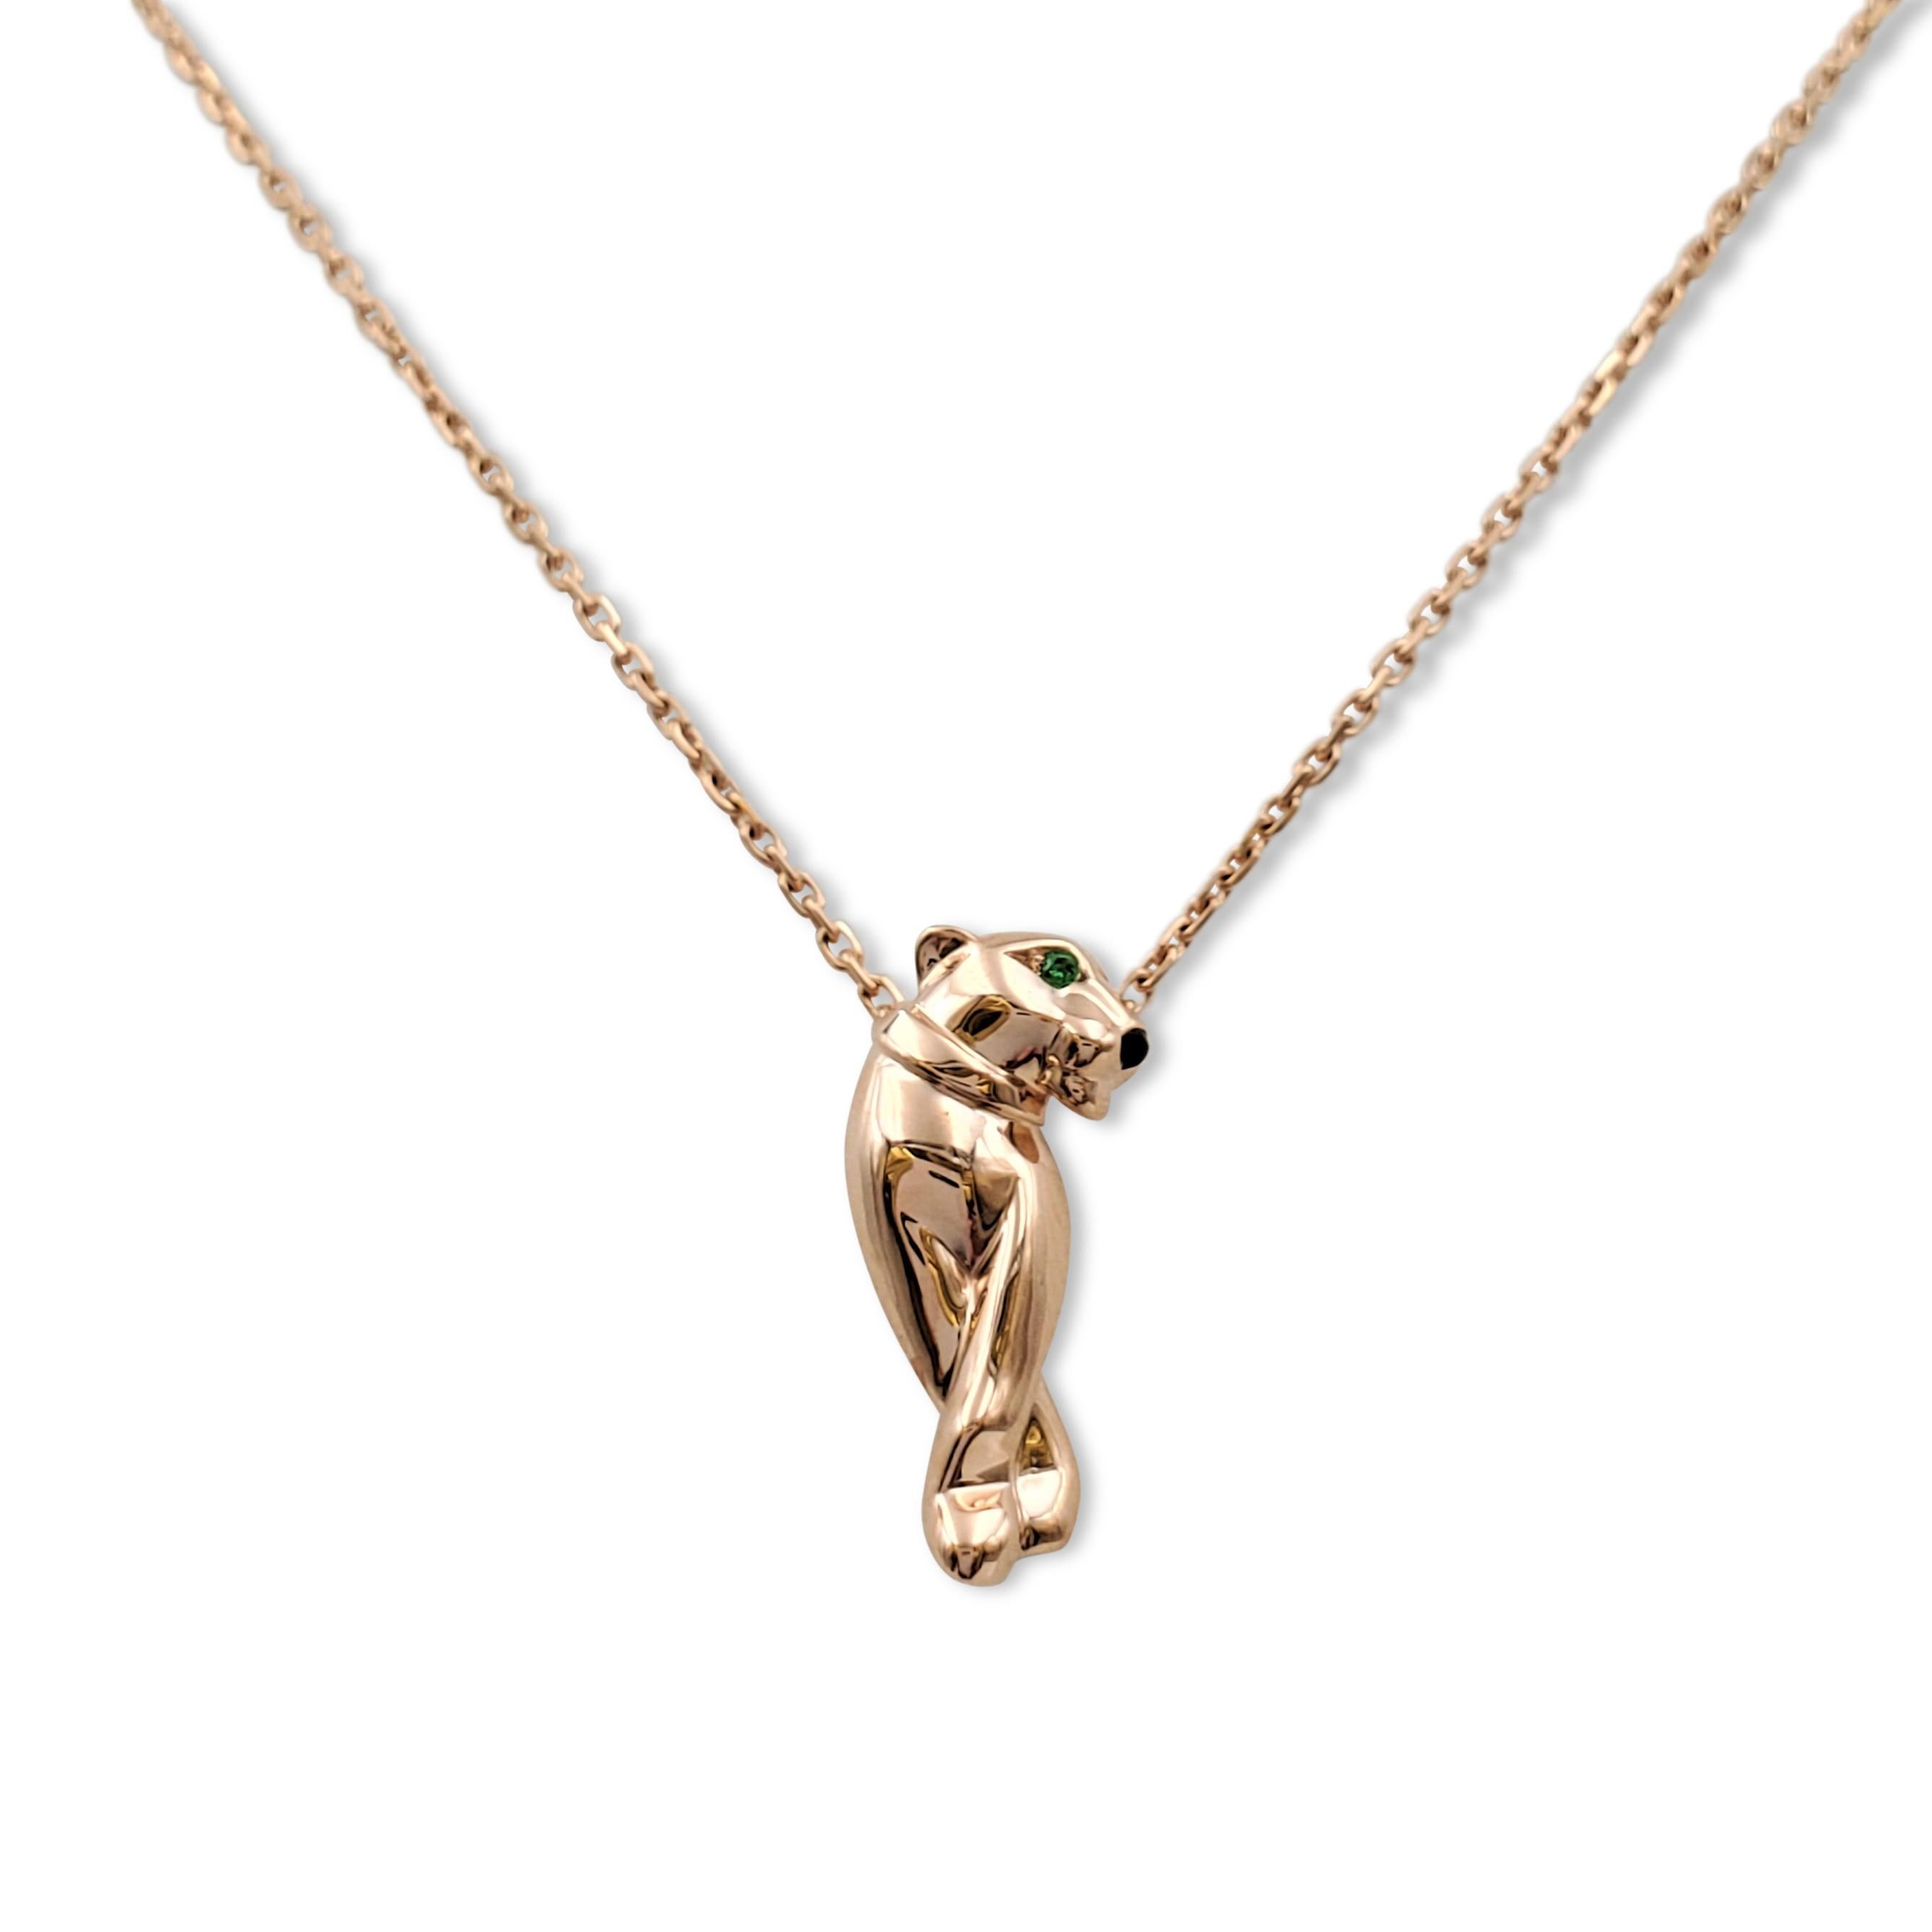 Authentic Cartier 'Panthère de Cartier' pendant necklace crafted in 18 karat rose gold centers on a panther, the symbolic animal of Cartier, set with lively tsavorite garnet eyes and an onyx nose. Signed Cartier, Au750, with serial number and